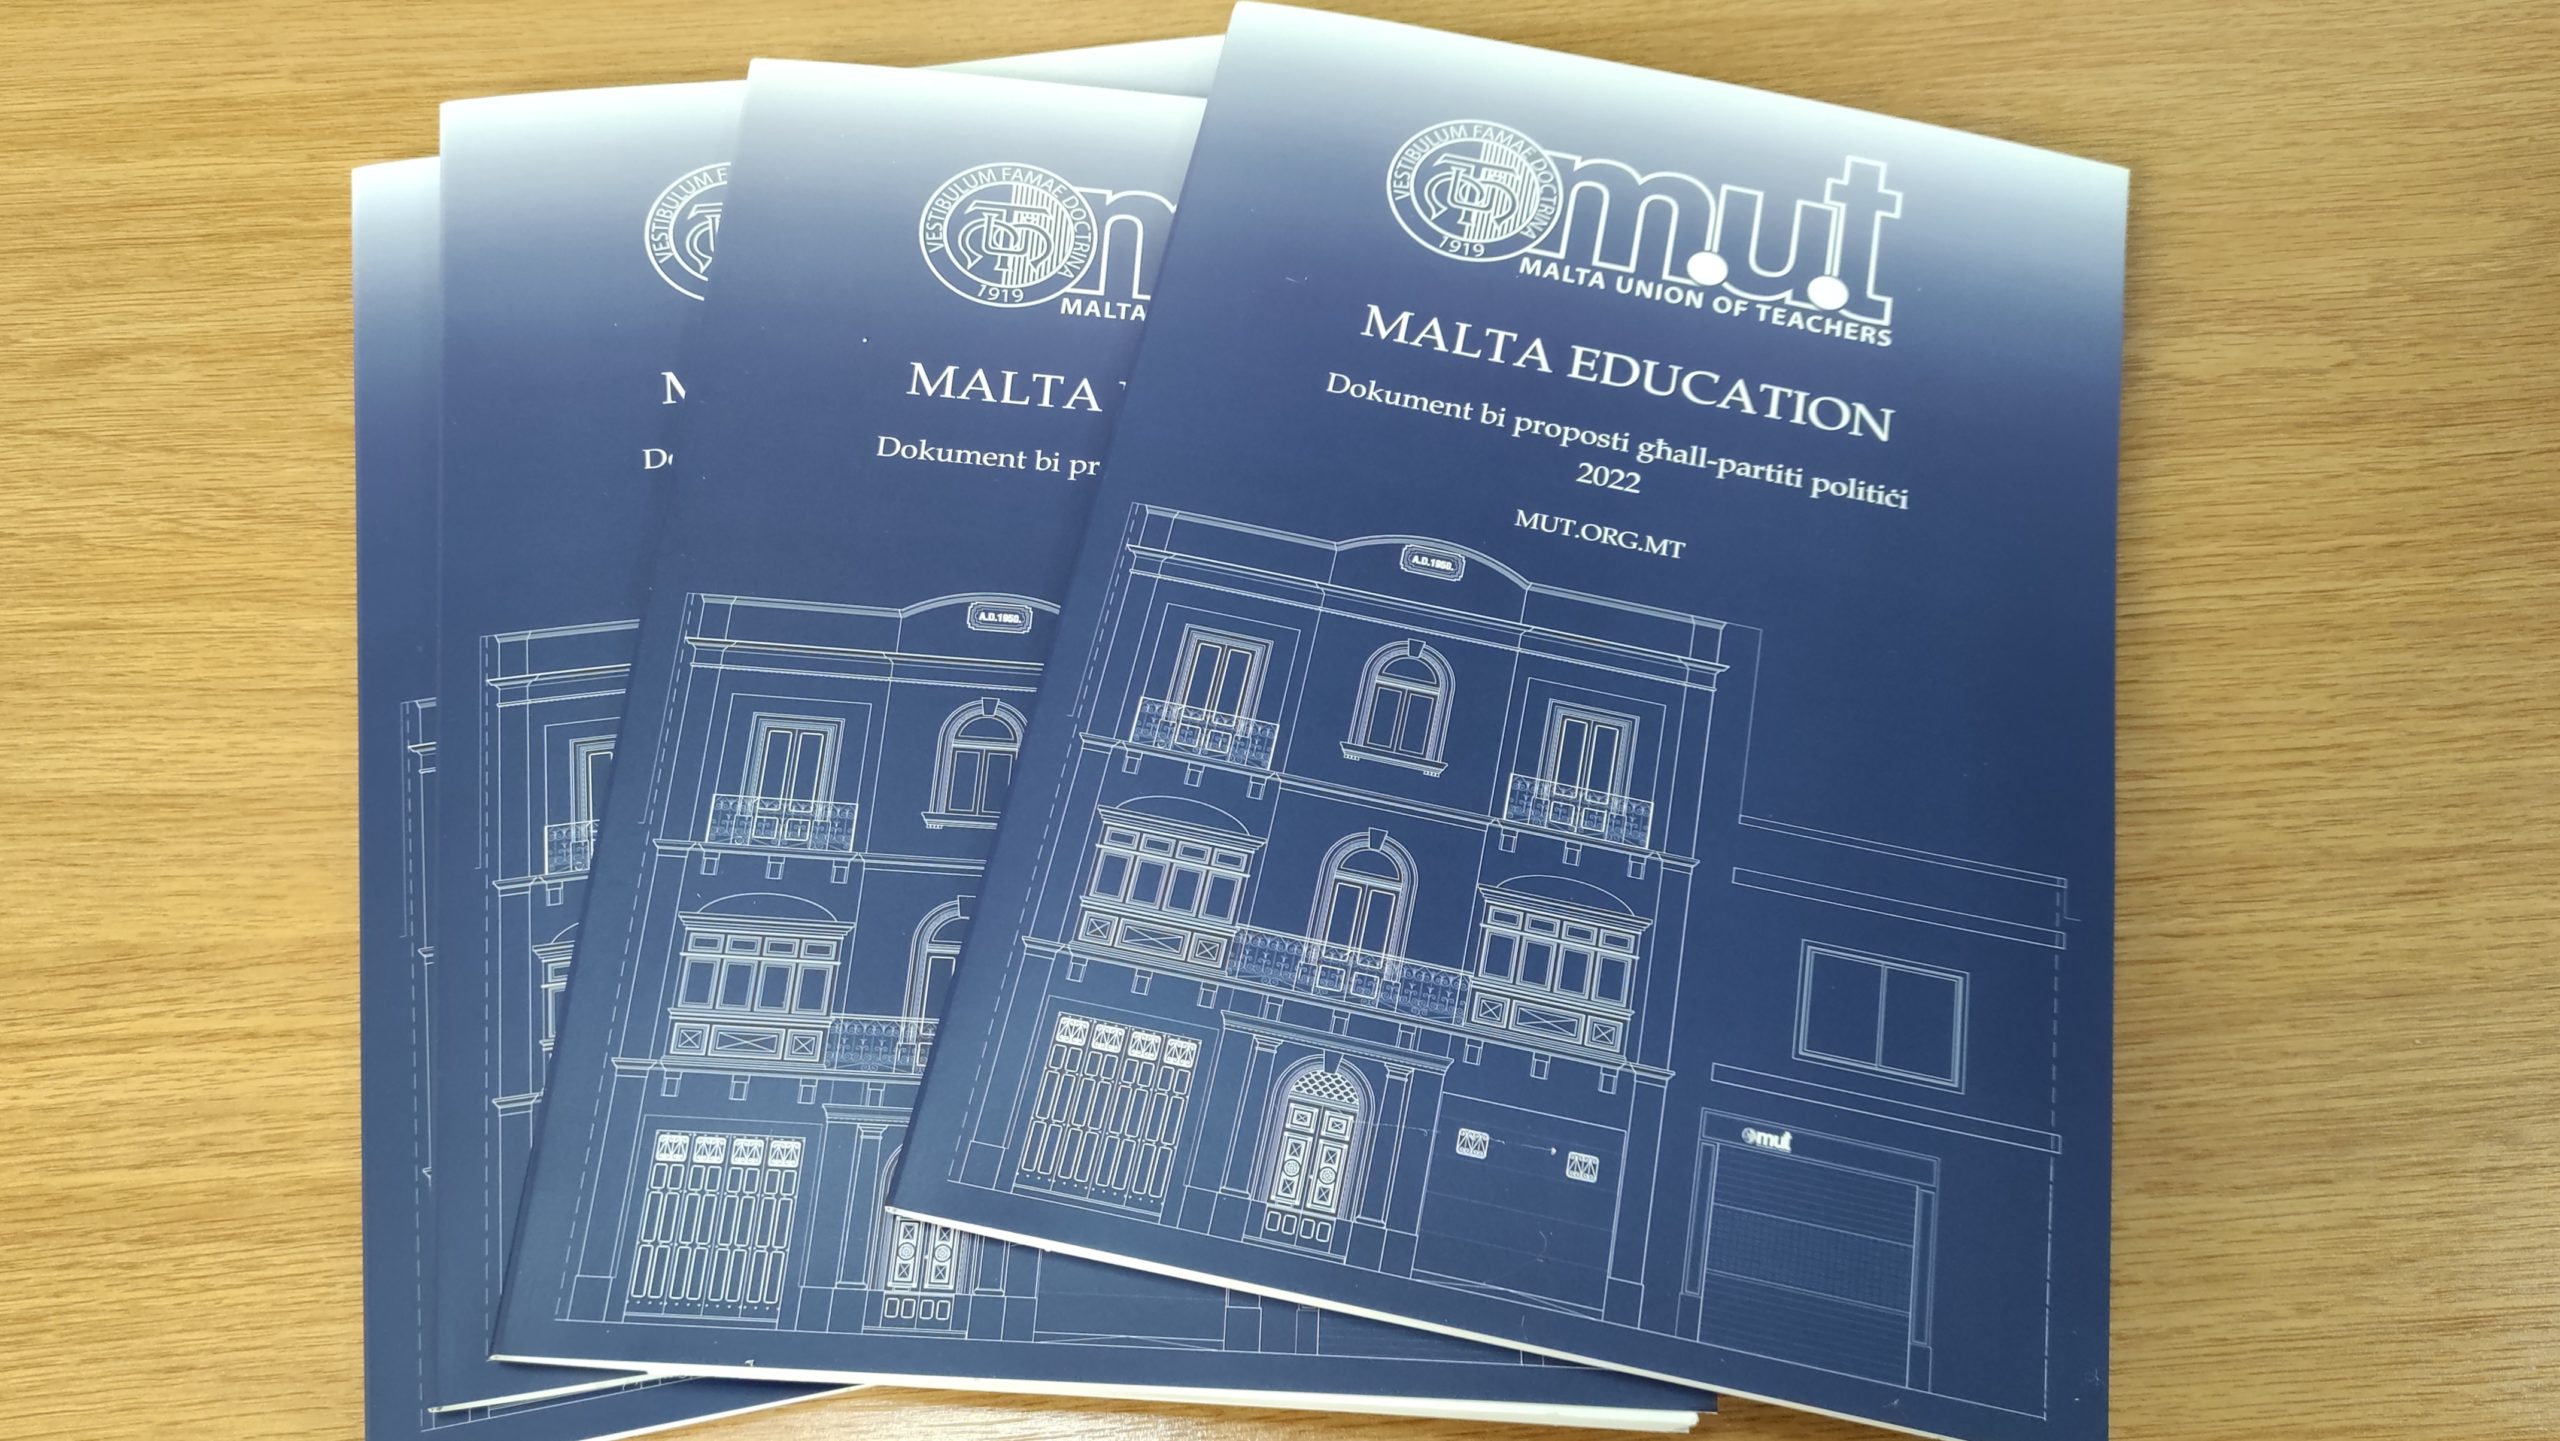 MUT publishes document with sixty proposals to be presented to political parties